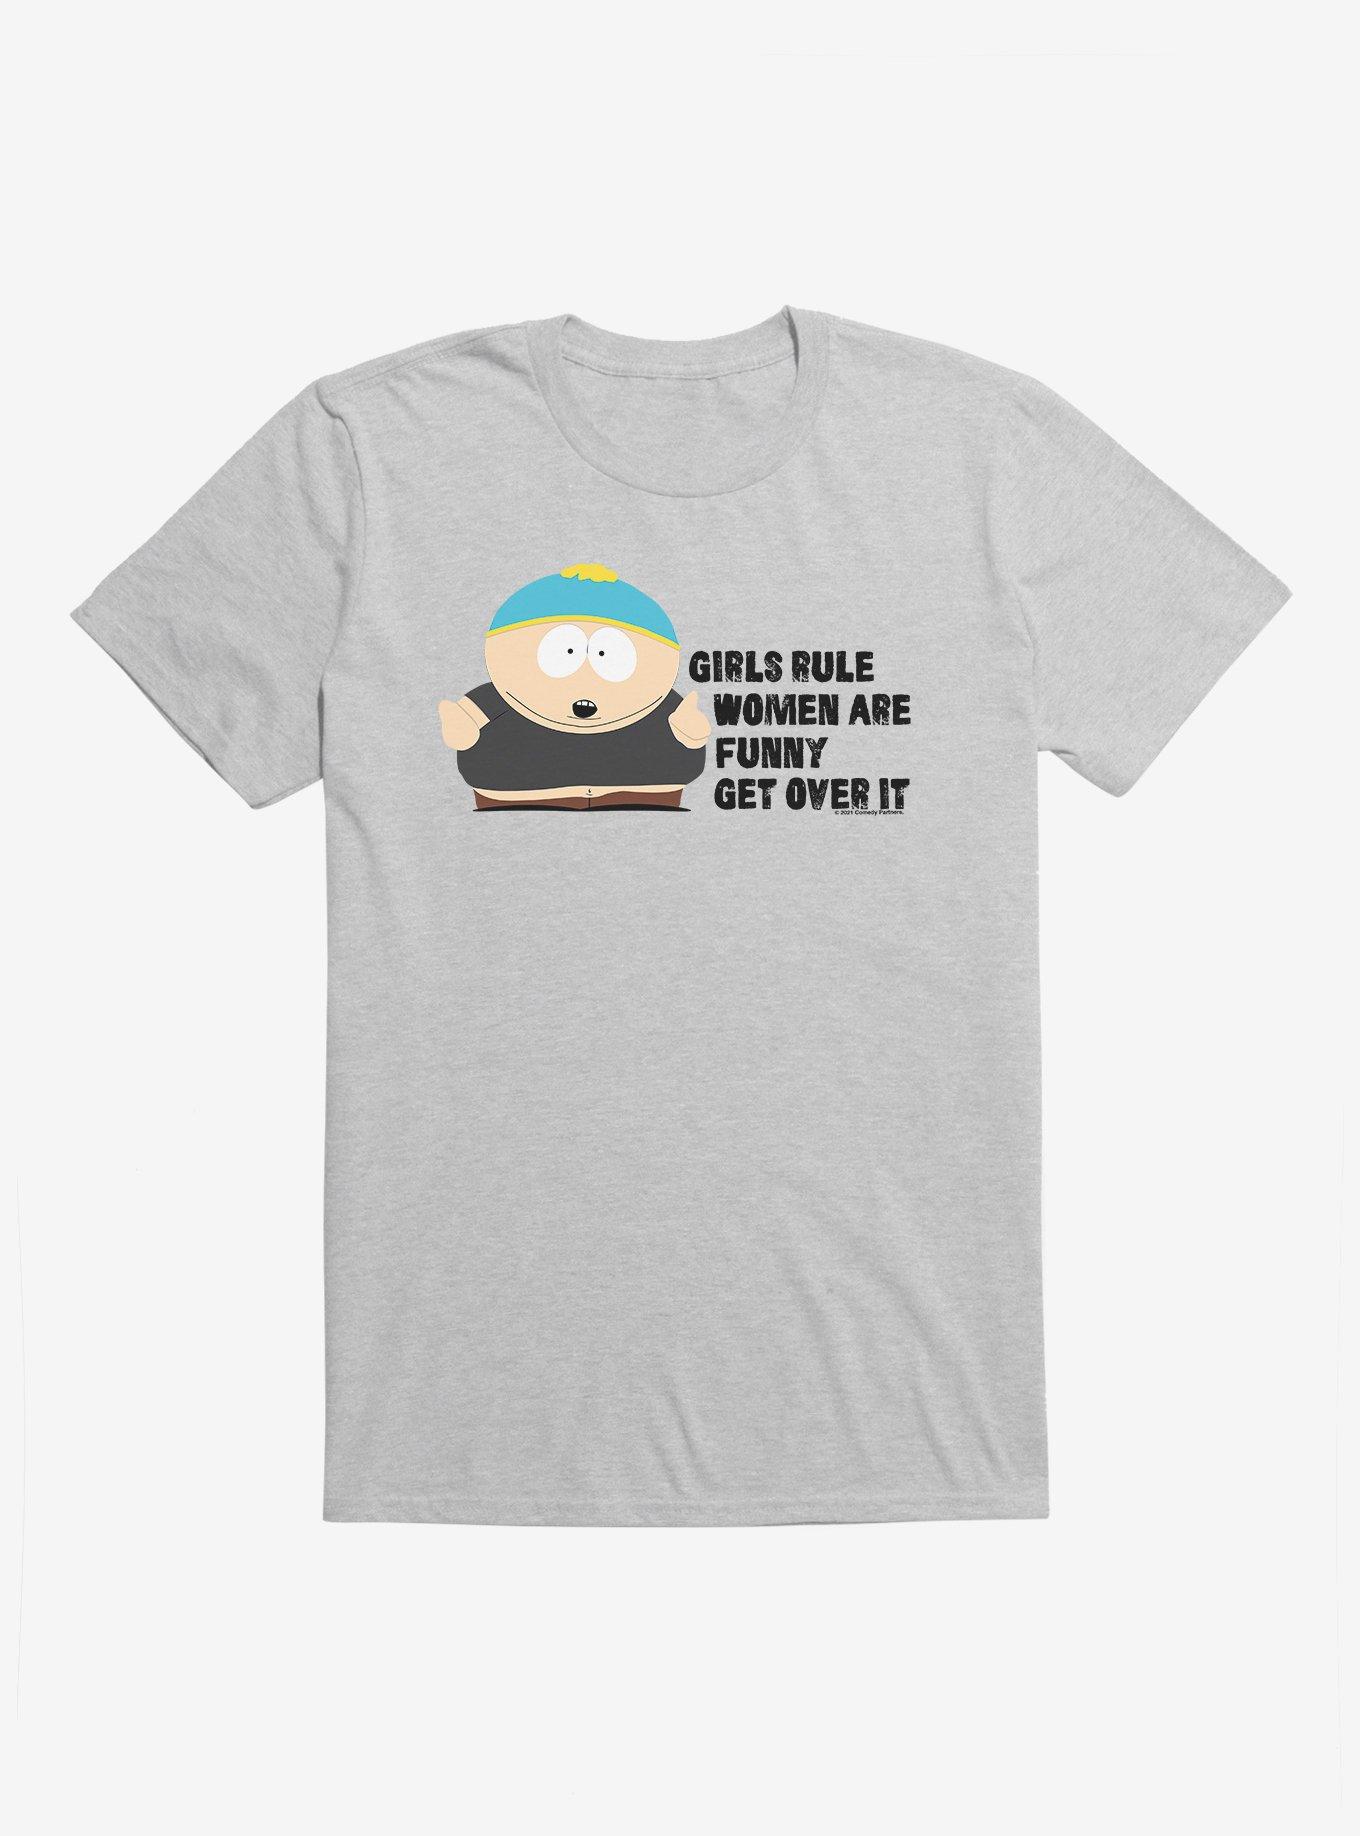 South Park Season Reference Girls Rule T-Shirt, HEATHER GREY, hi-res